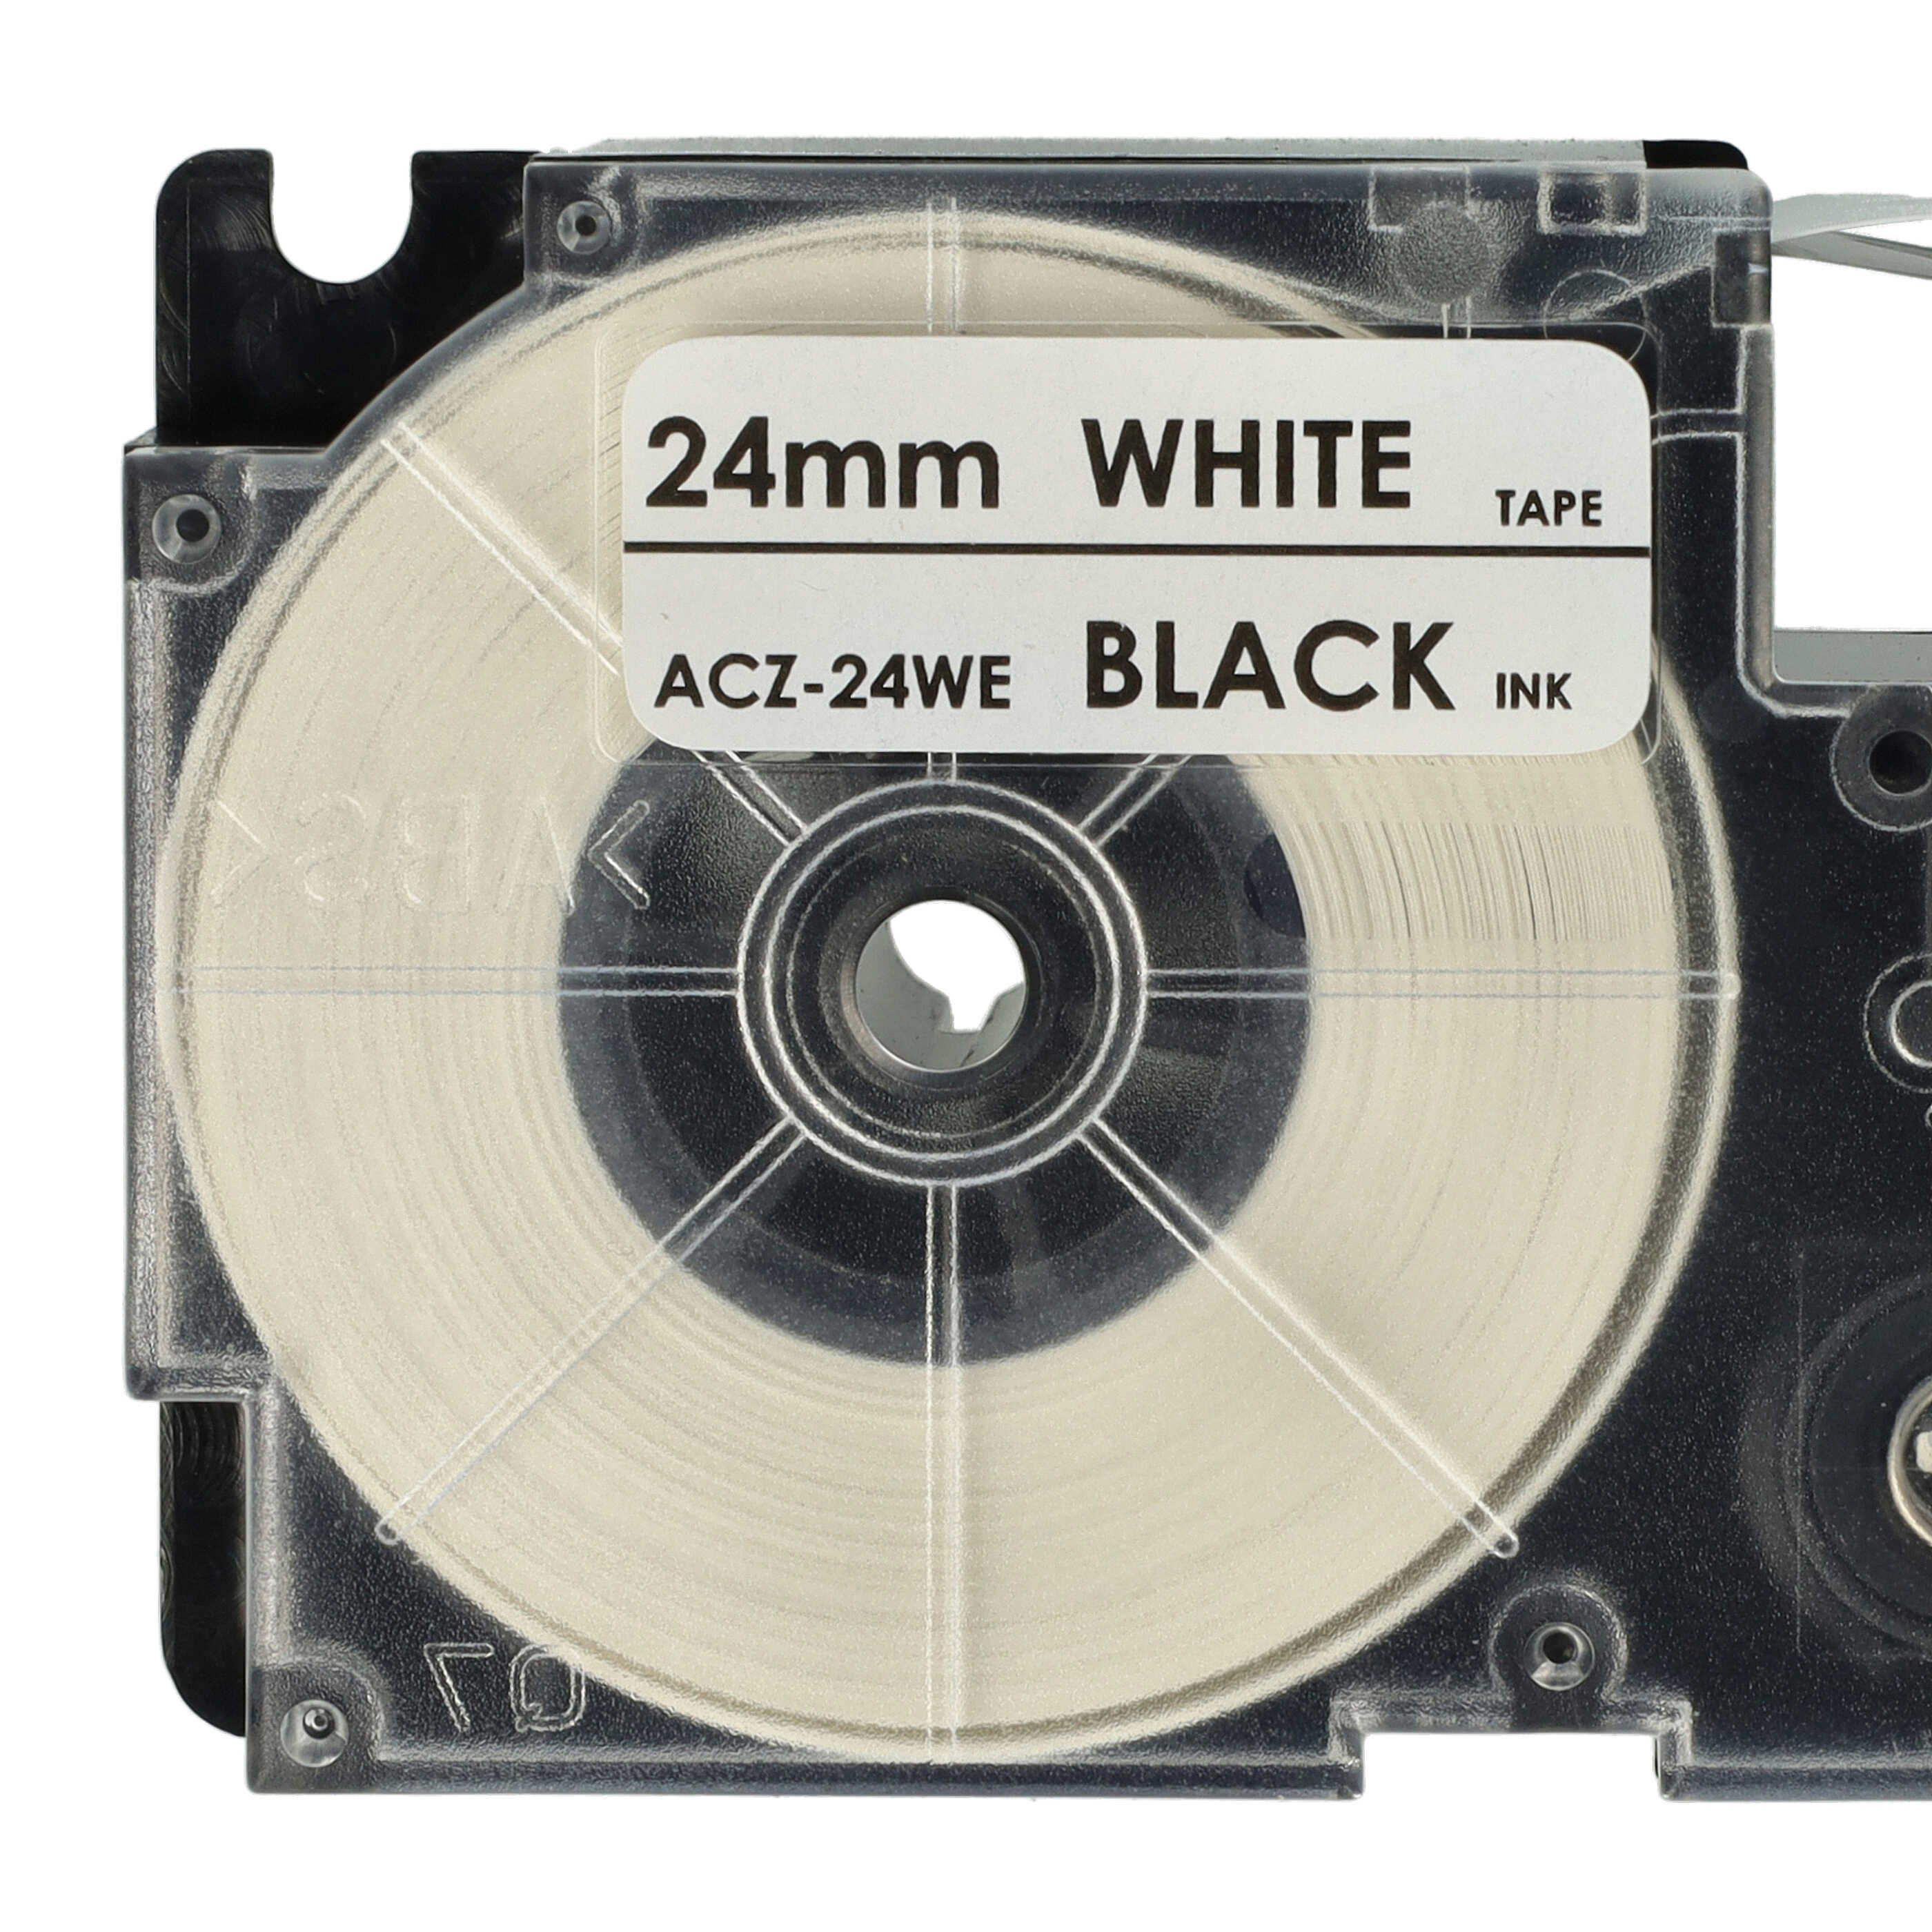 10x Label Tape as Replacement for Casio XR-24WE1 - 24 mm Black to White